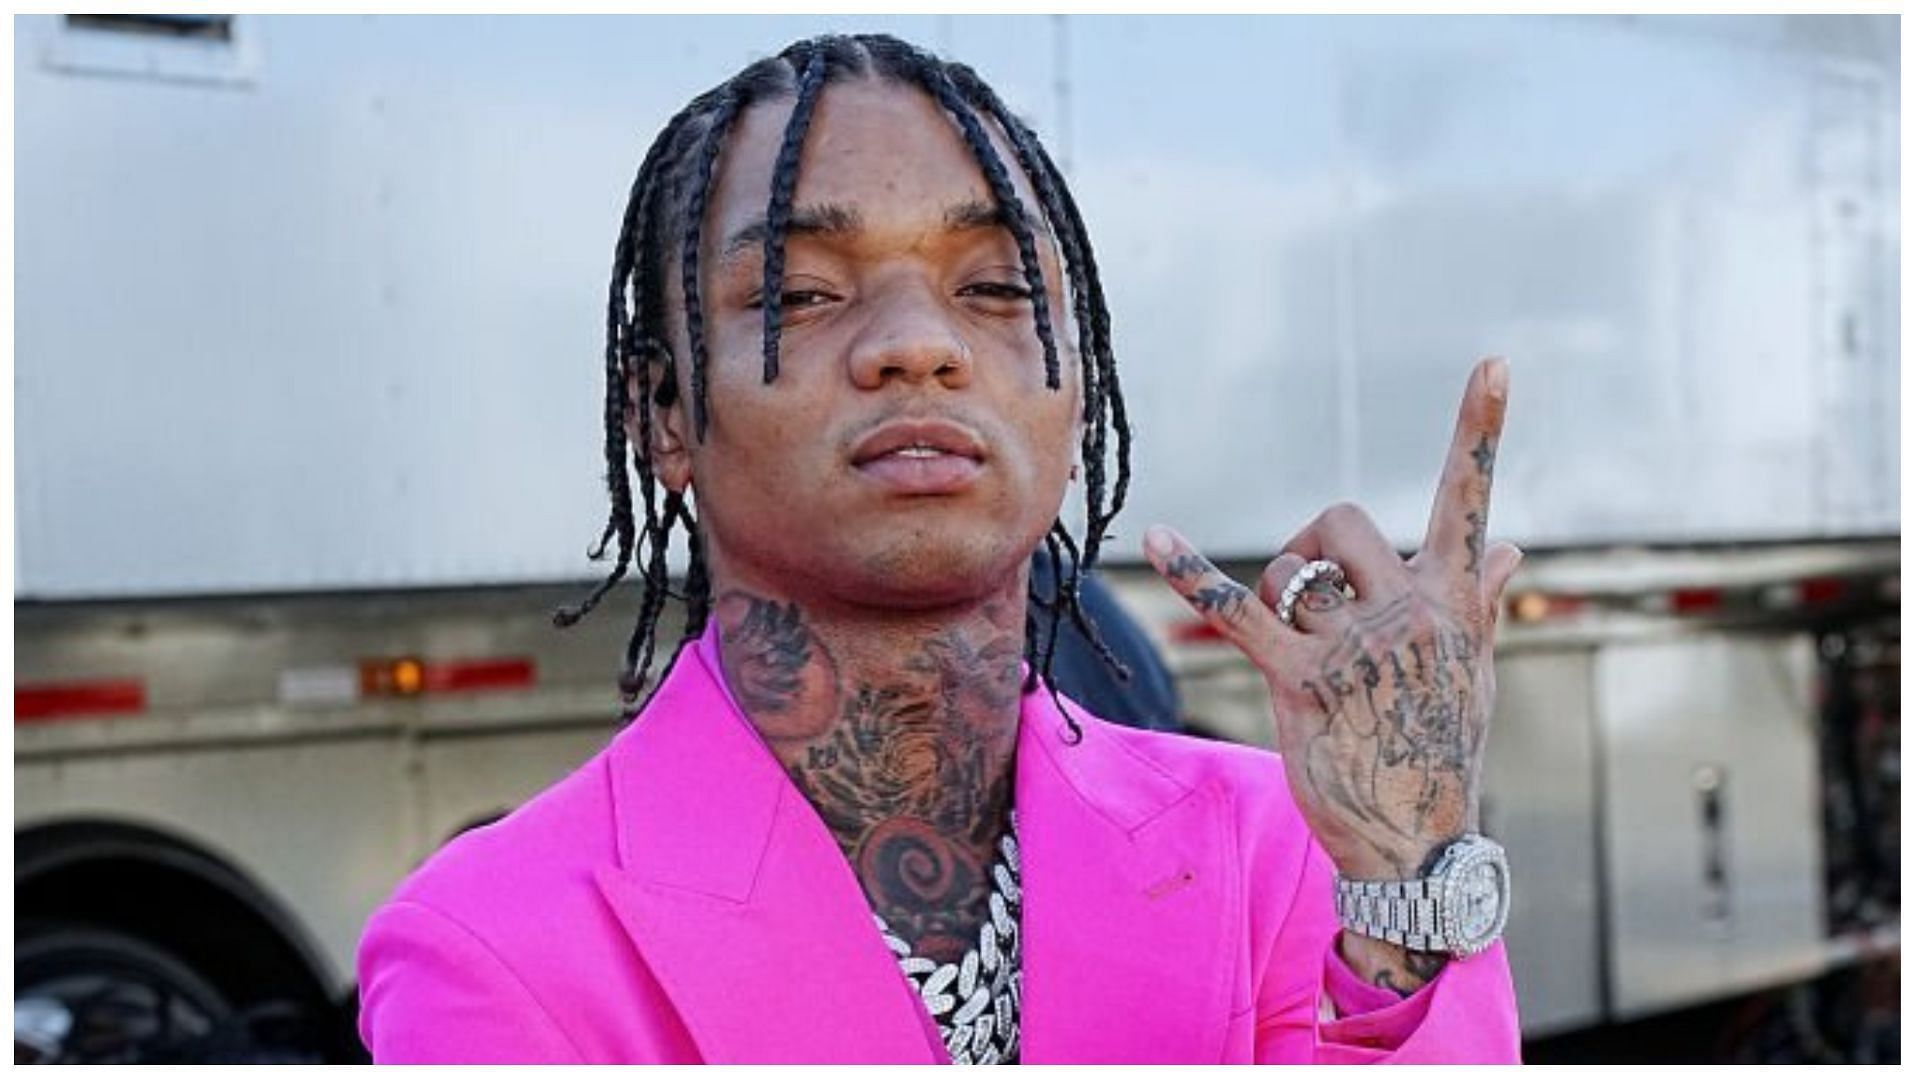 Swae Lee accumulated a lot of wealth from his work in the music industry (Image via Jeff Kravitz/Getty Images)